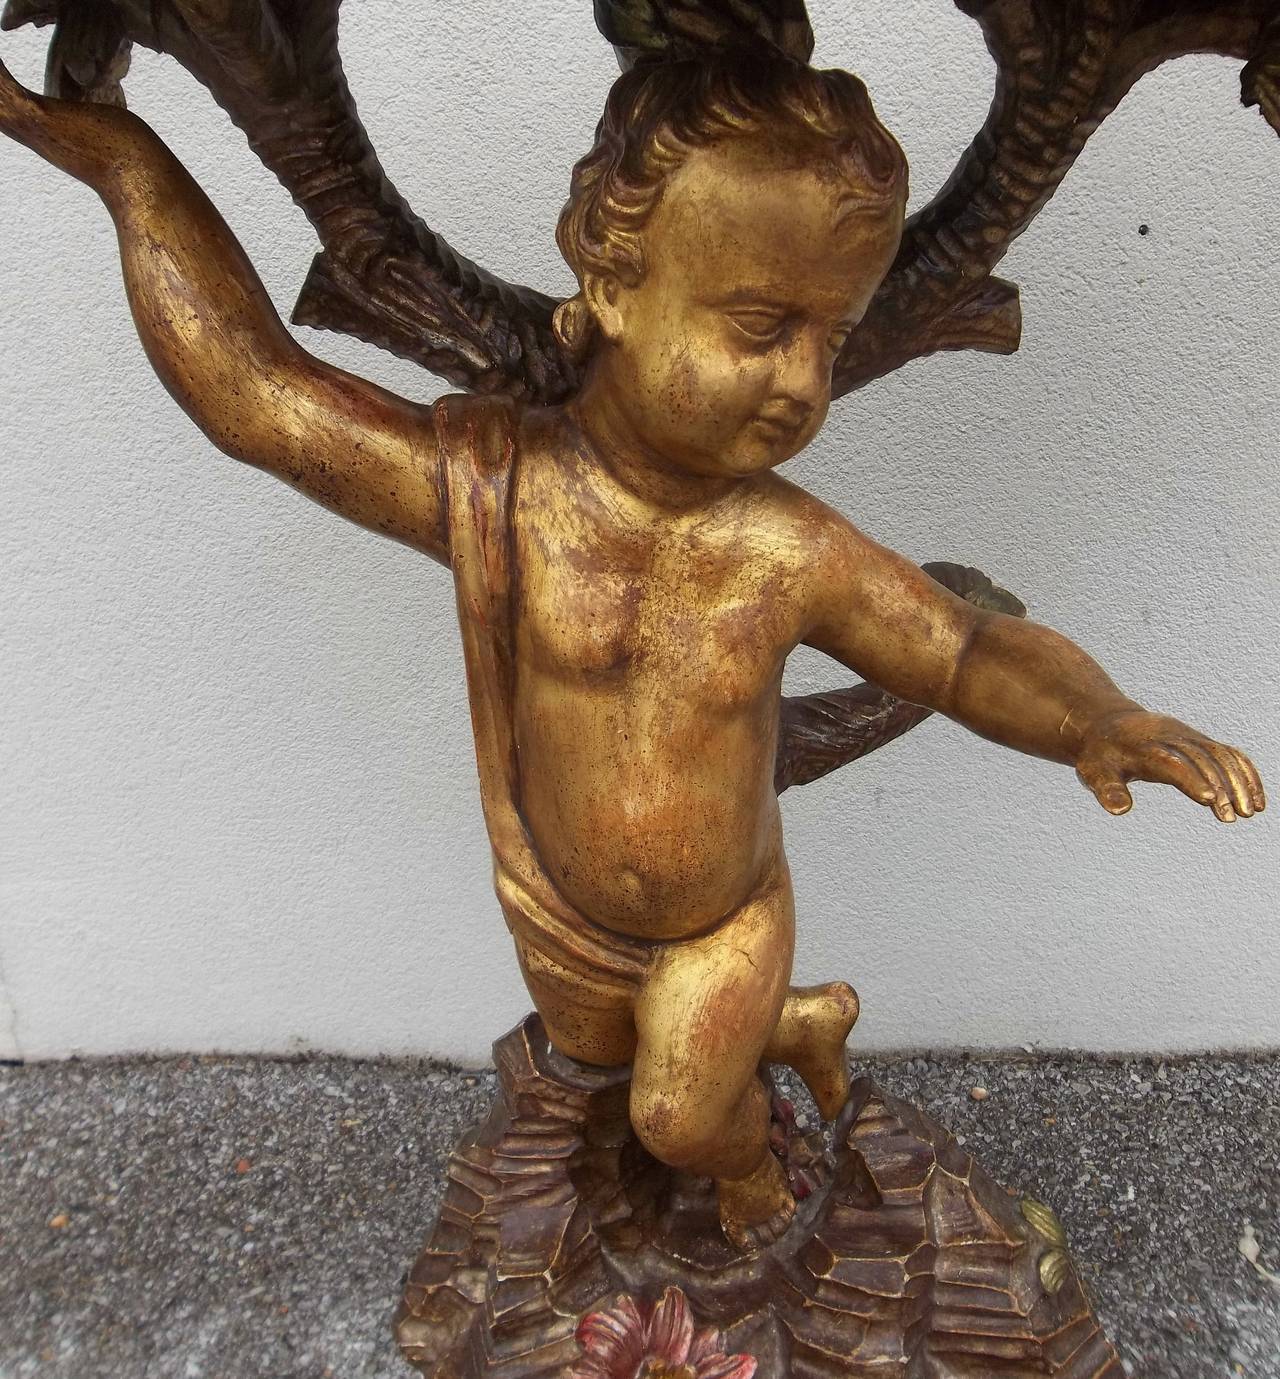 The central giltwood putto or cherub figure probably mid-19th century(and possibly Roman ). The grotto rock and tree  designed to incorporate the putto as the rock formation is adjusted to the position of both feet and knee. The tree with green gilt